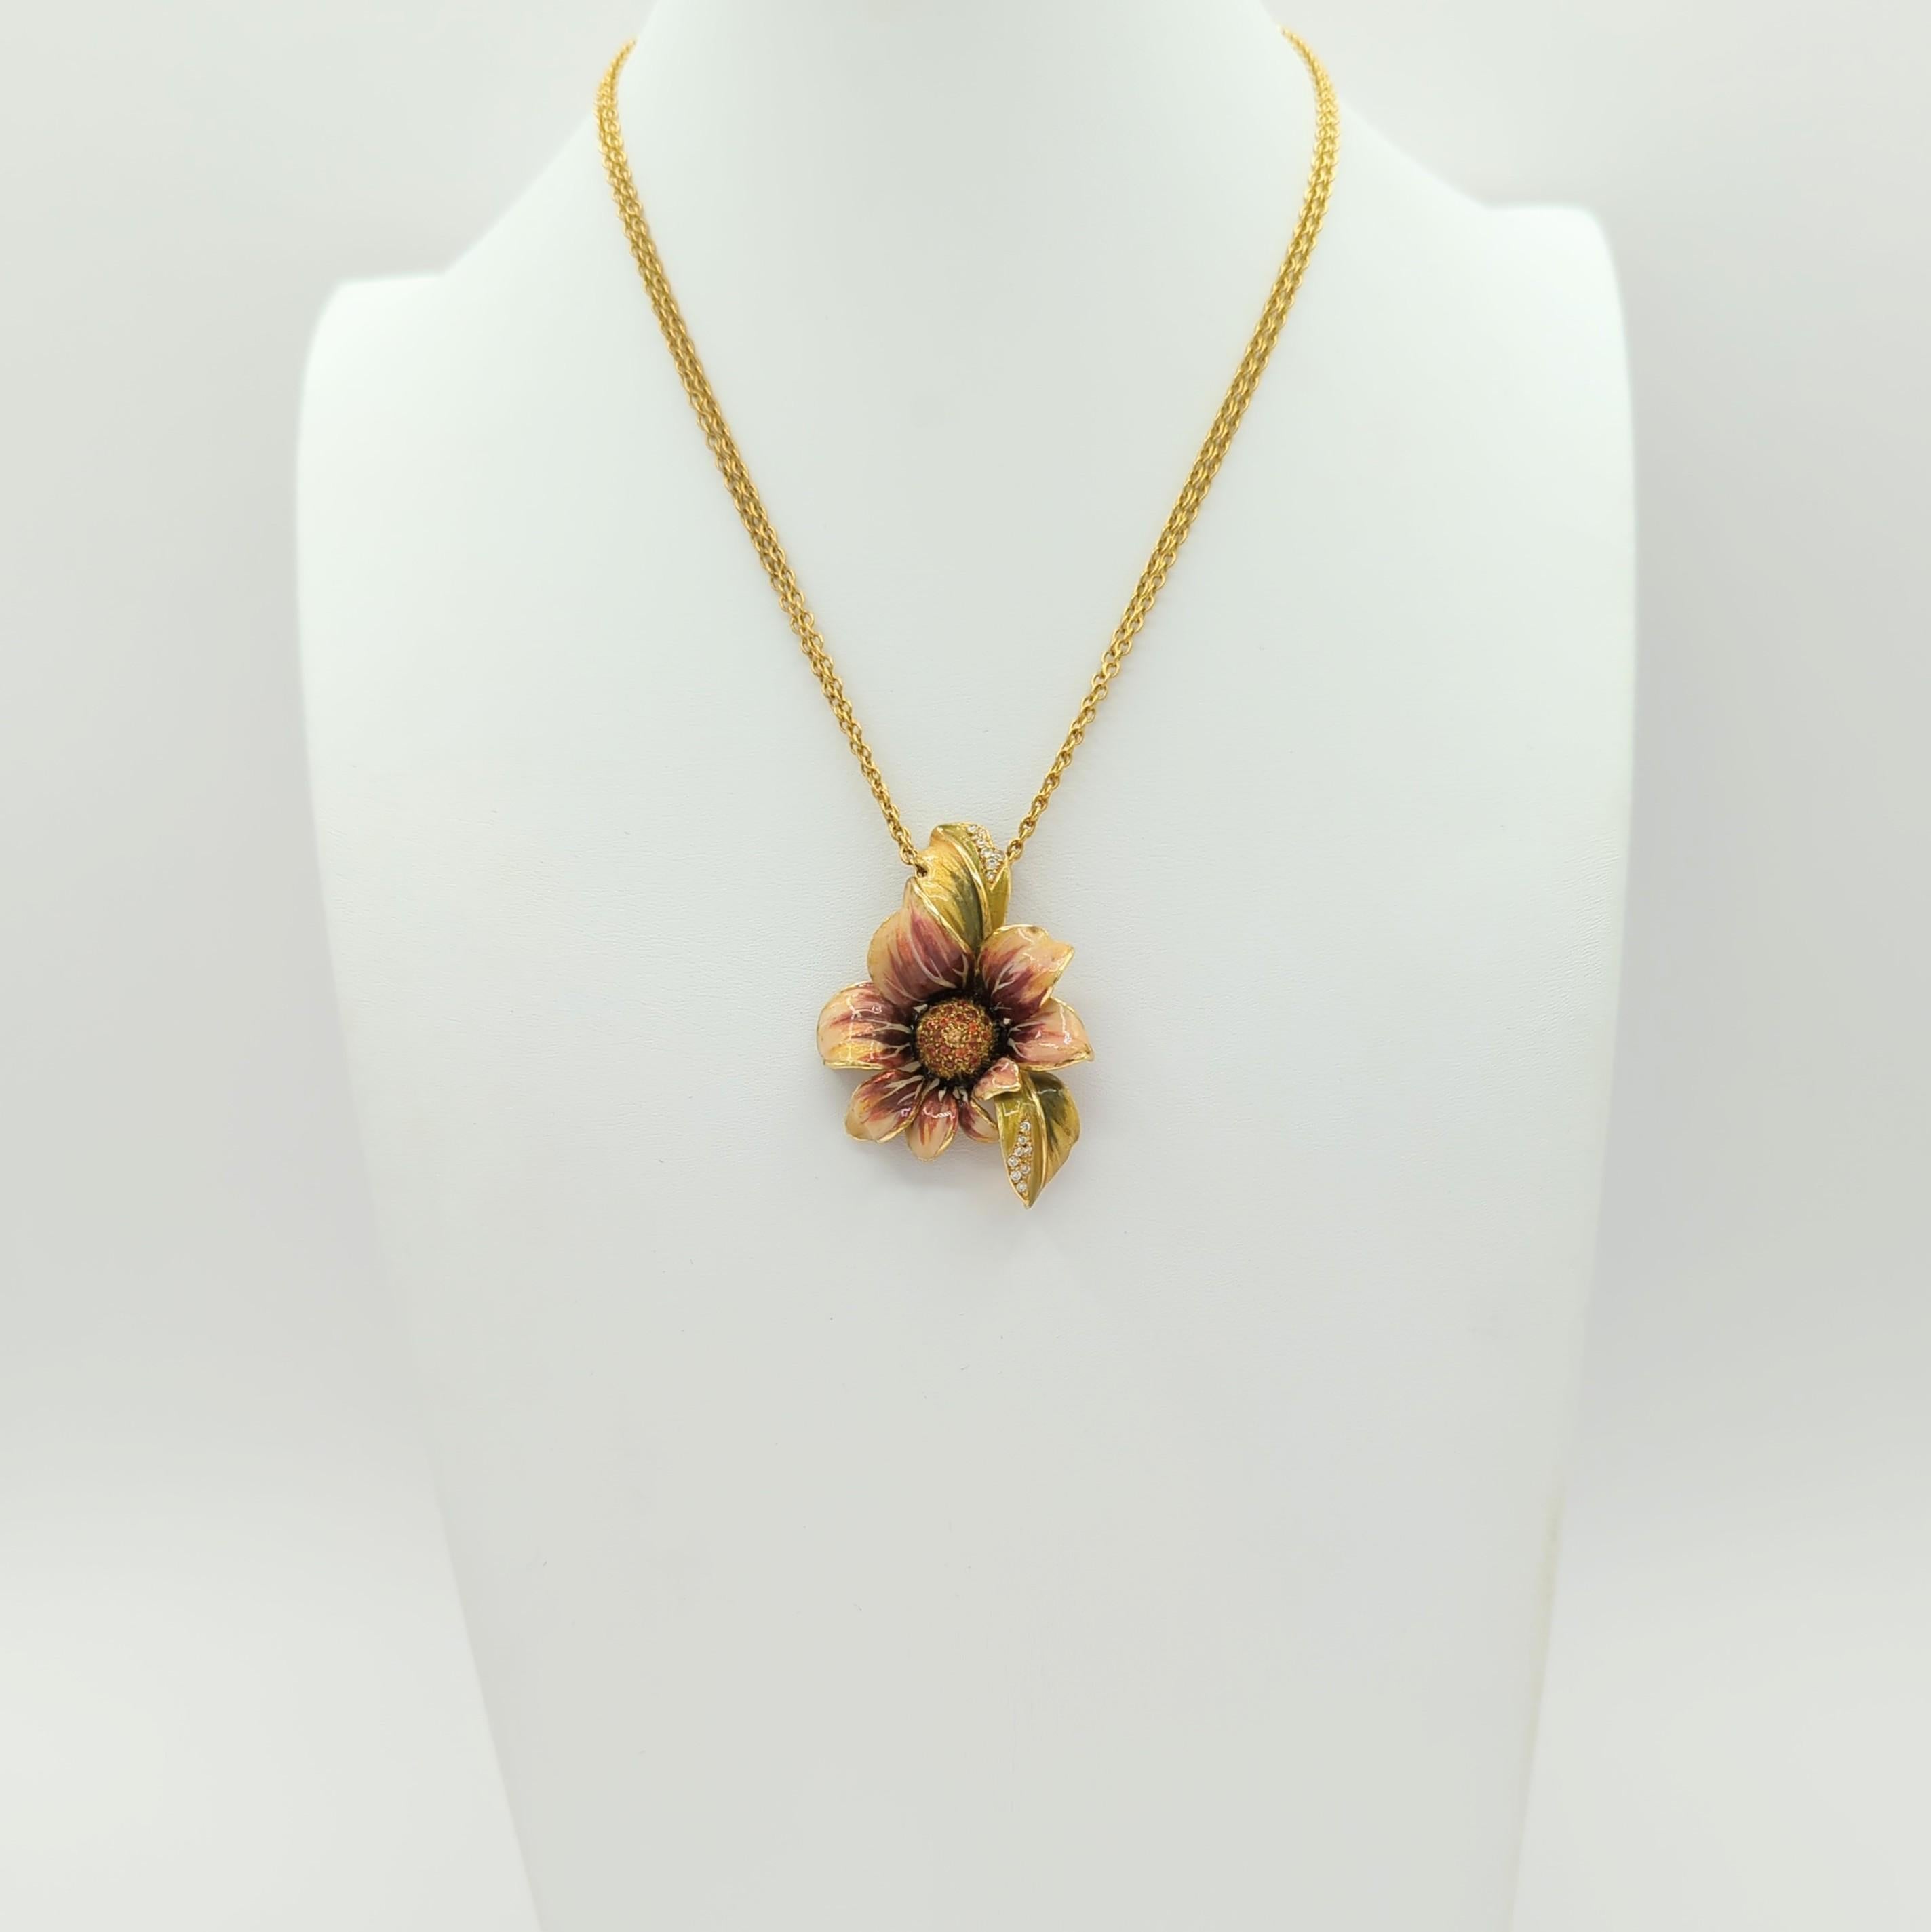  White Diamond Flower design Pendant Necklace in 18K Yellow Gold In New Condition For Sale In Los Angeles, CA